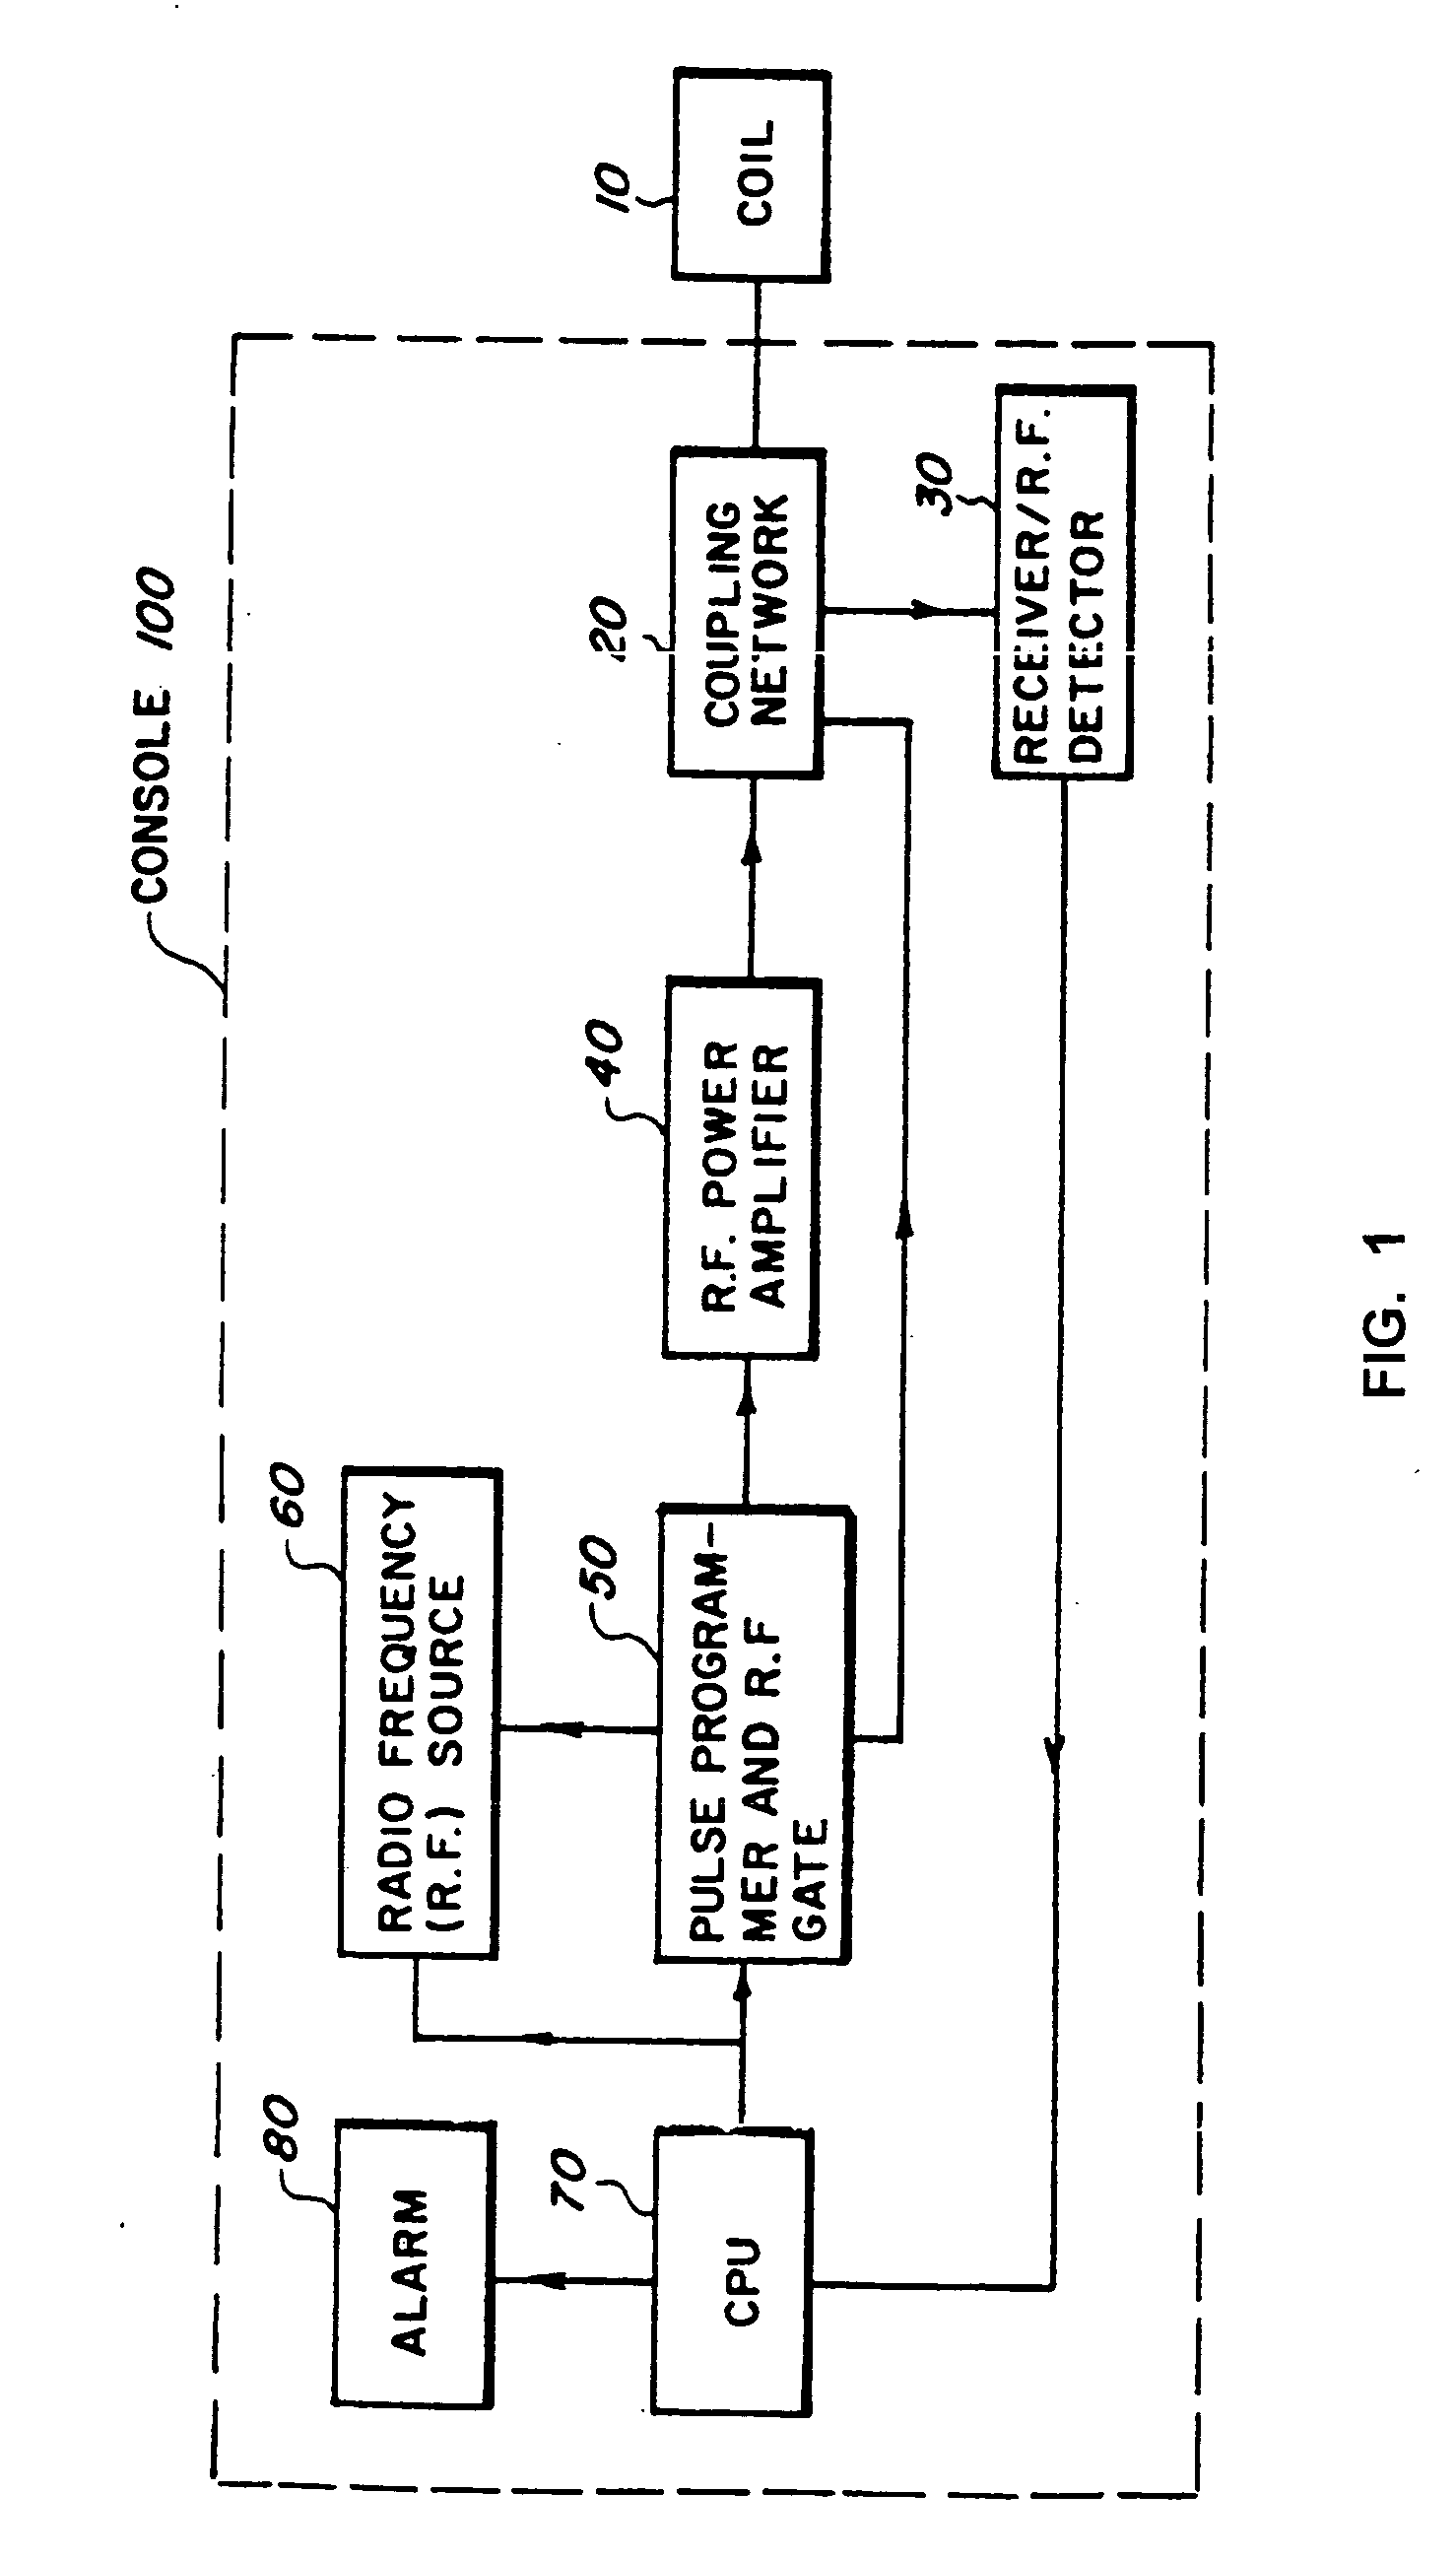 Cancellation of ringing in magnetic resonance utilizing a composite pulse